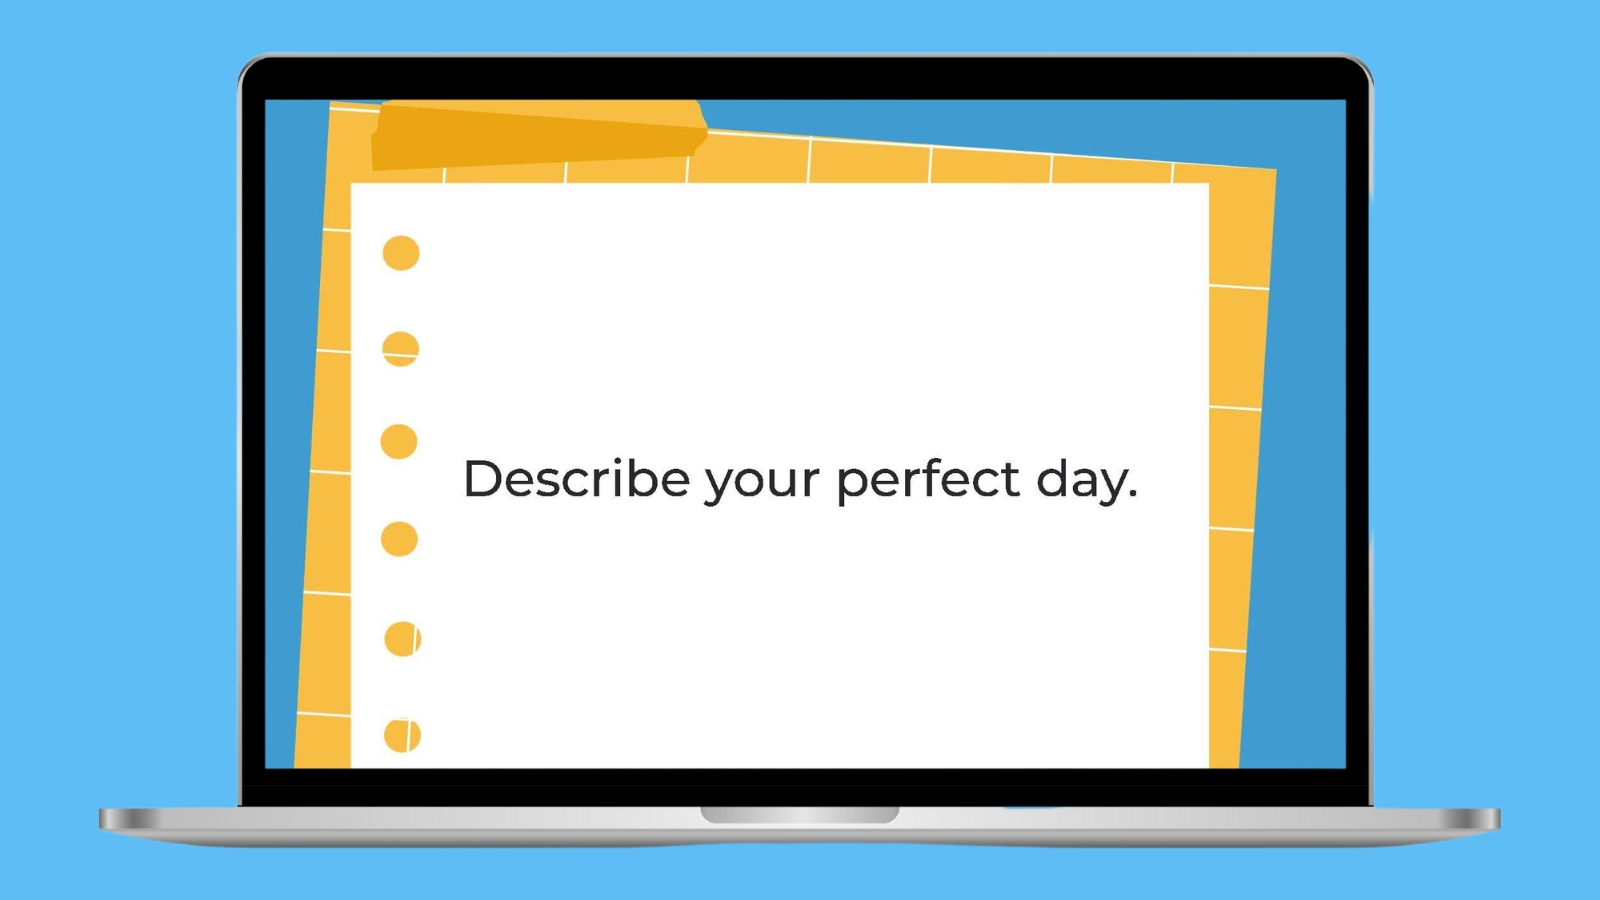 Describe your perfect day.